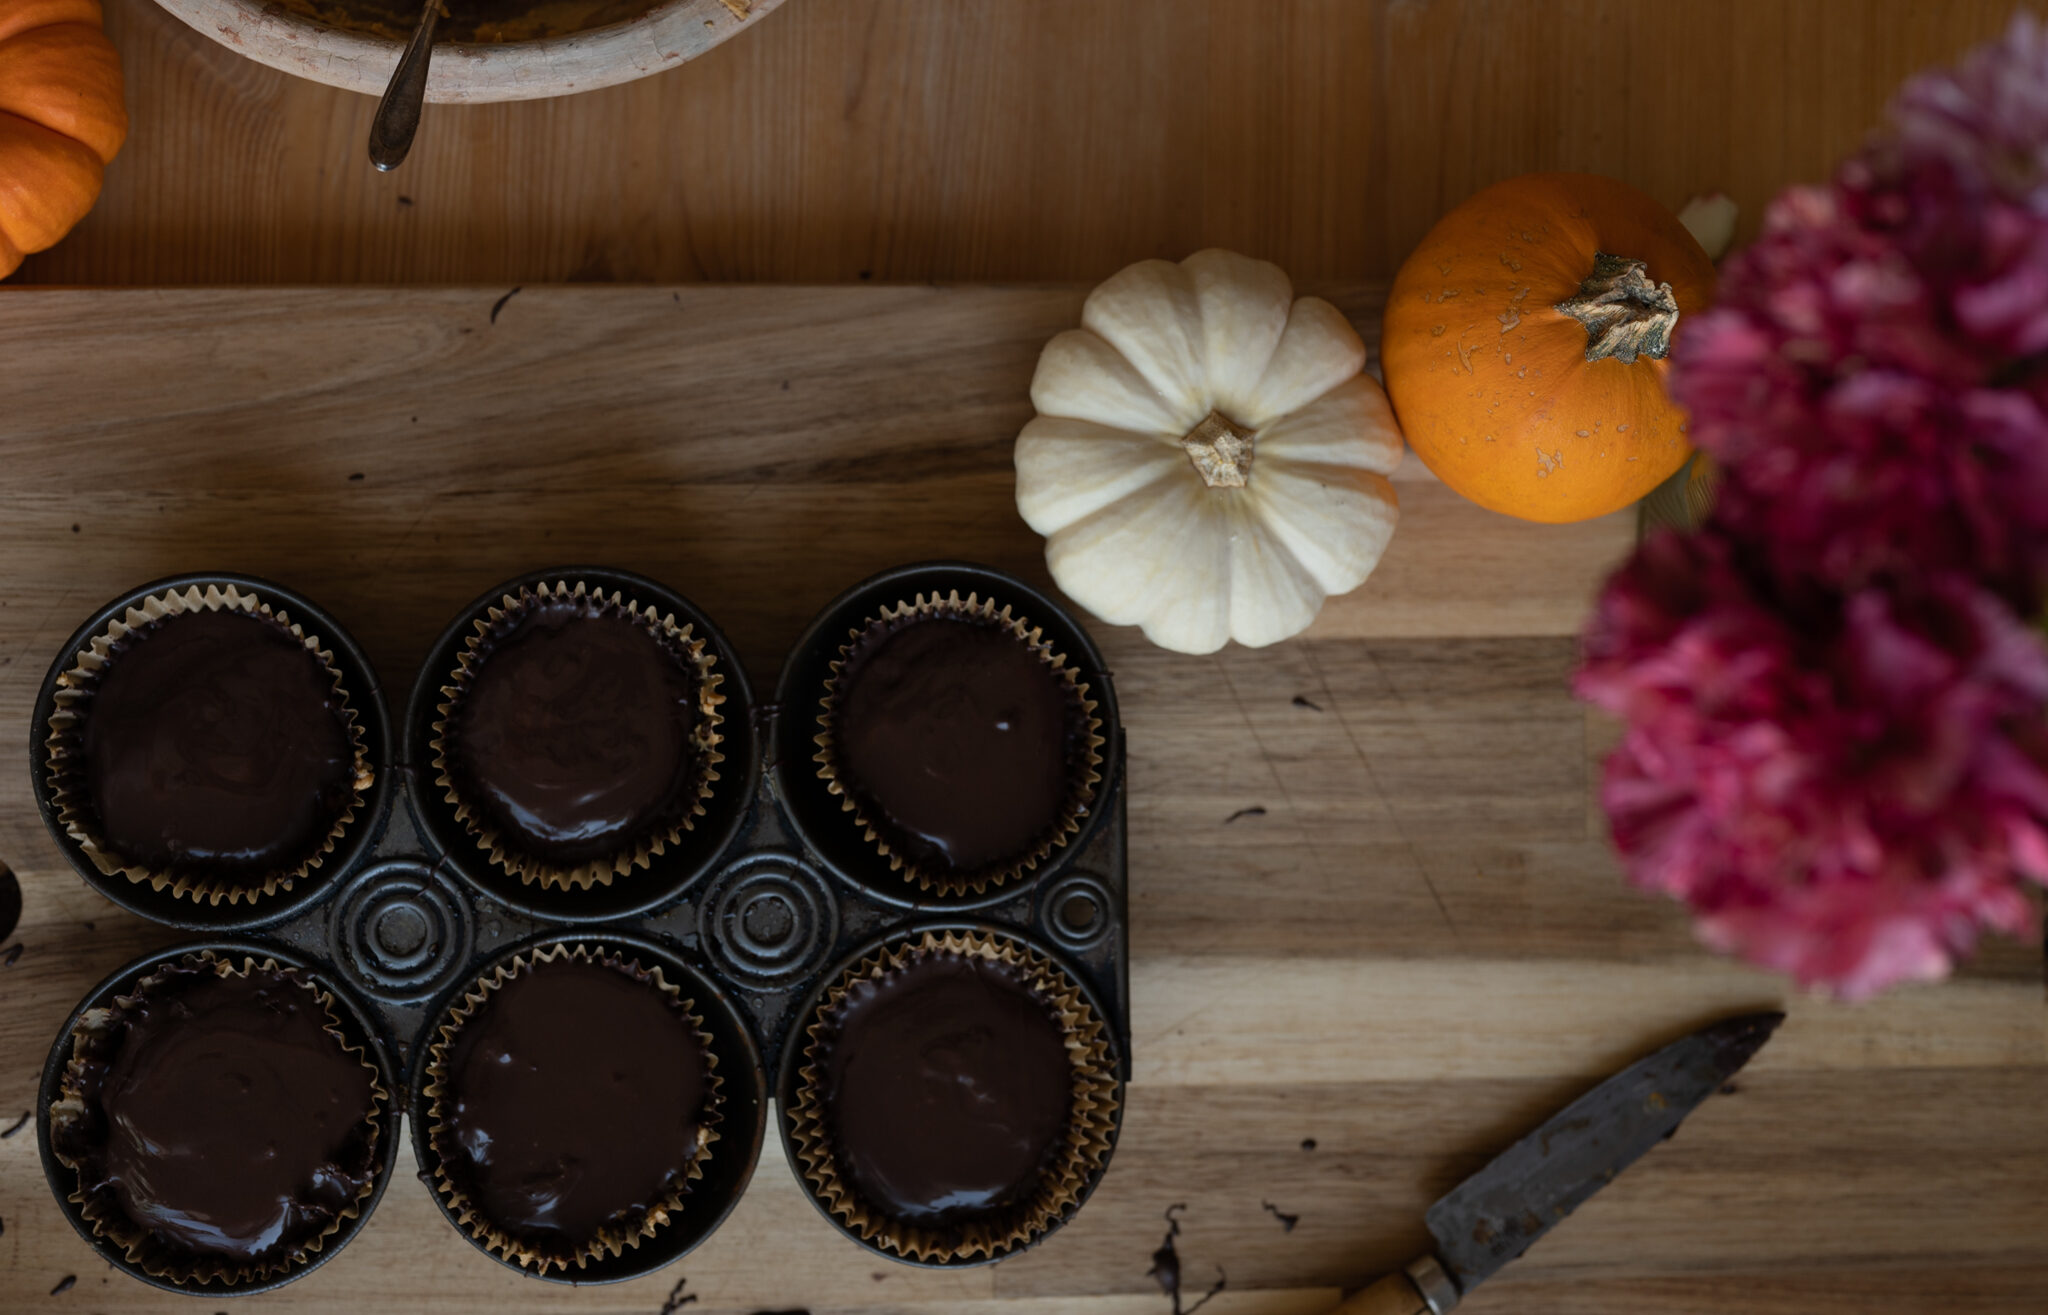 herbal peanut butter cups in a muffin pan with flowers and pumpkins next to it